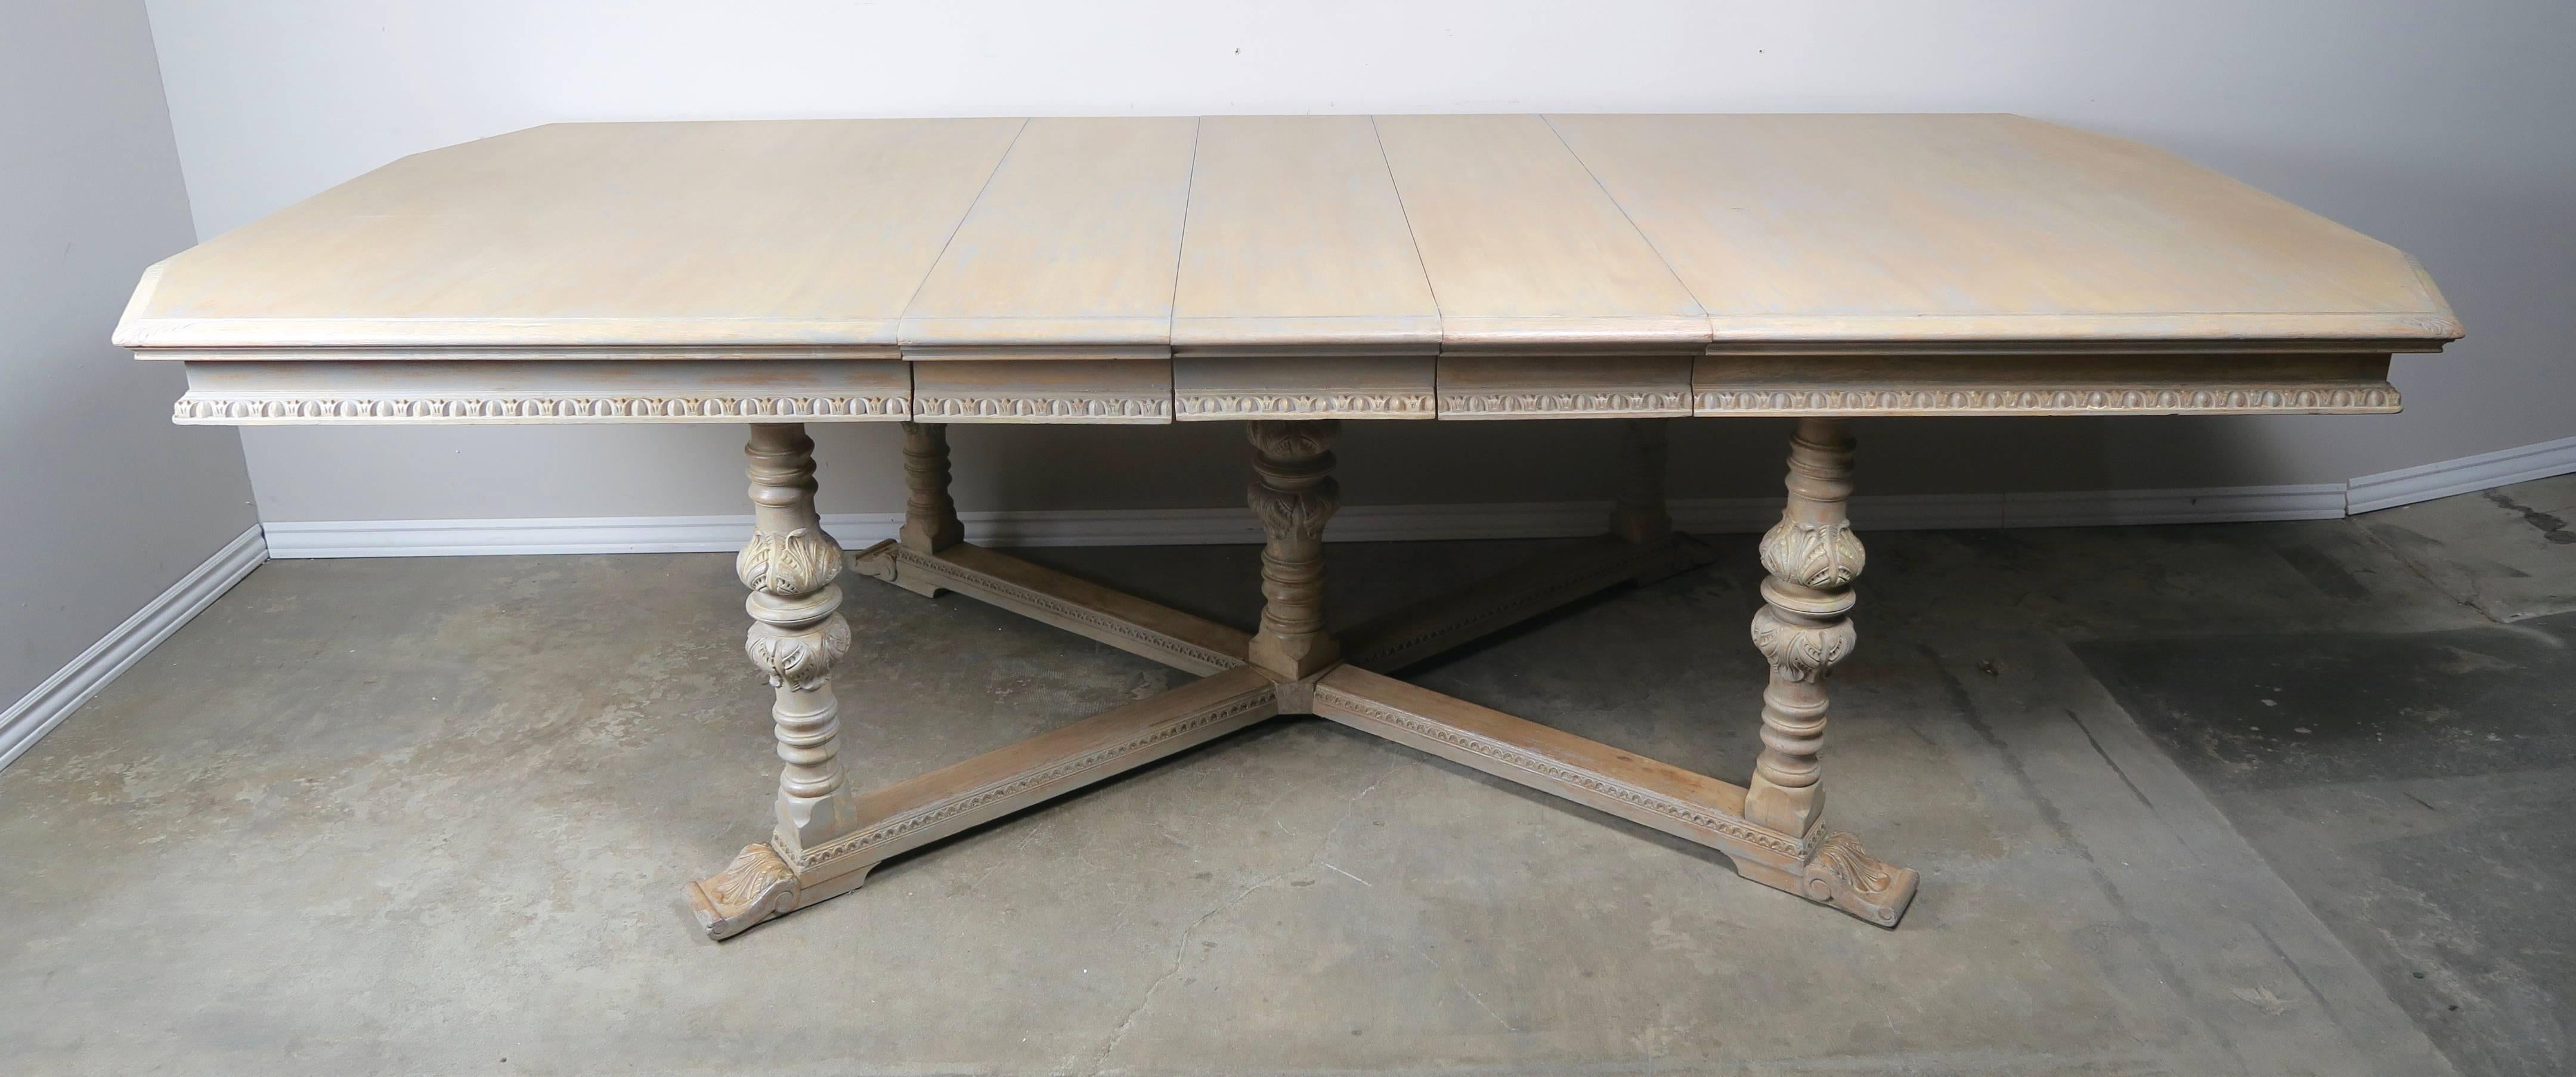 20th Century Italian Neoclassical Style Dining Room Table with Leaves